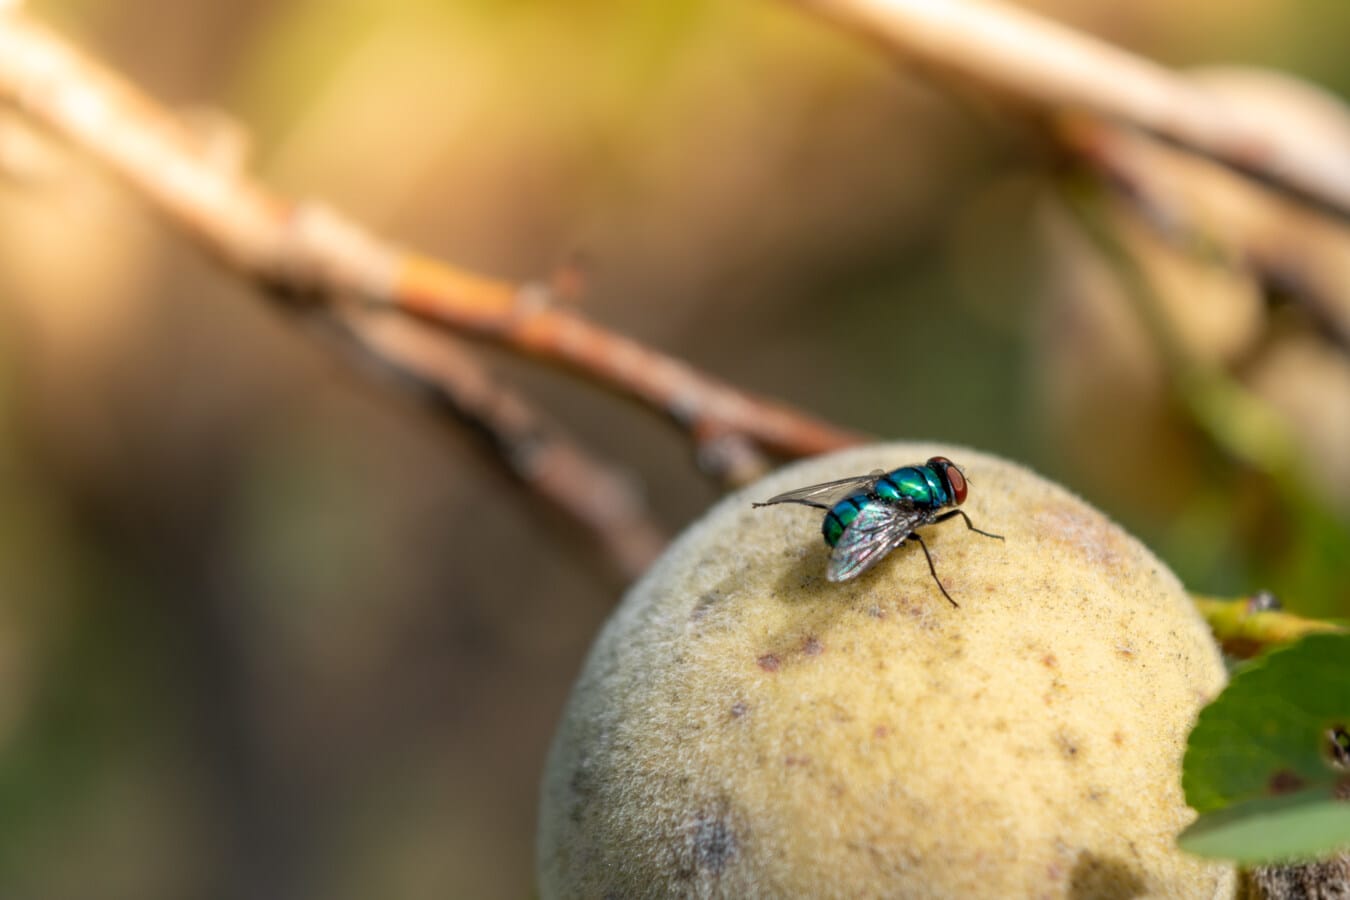 fluorescent, dark green, fly insect, peach, fruit, insect, arthropod, blur, animal, focus